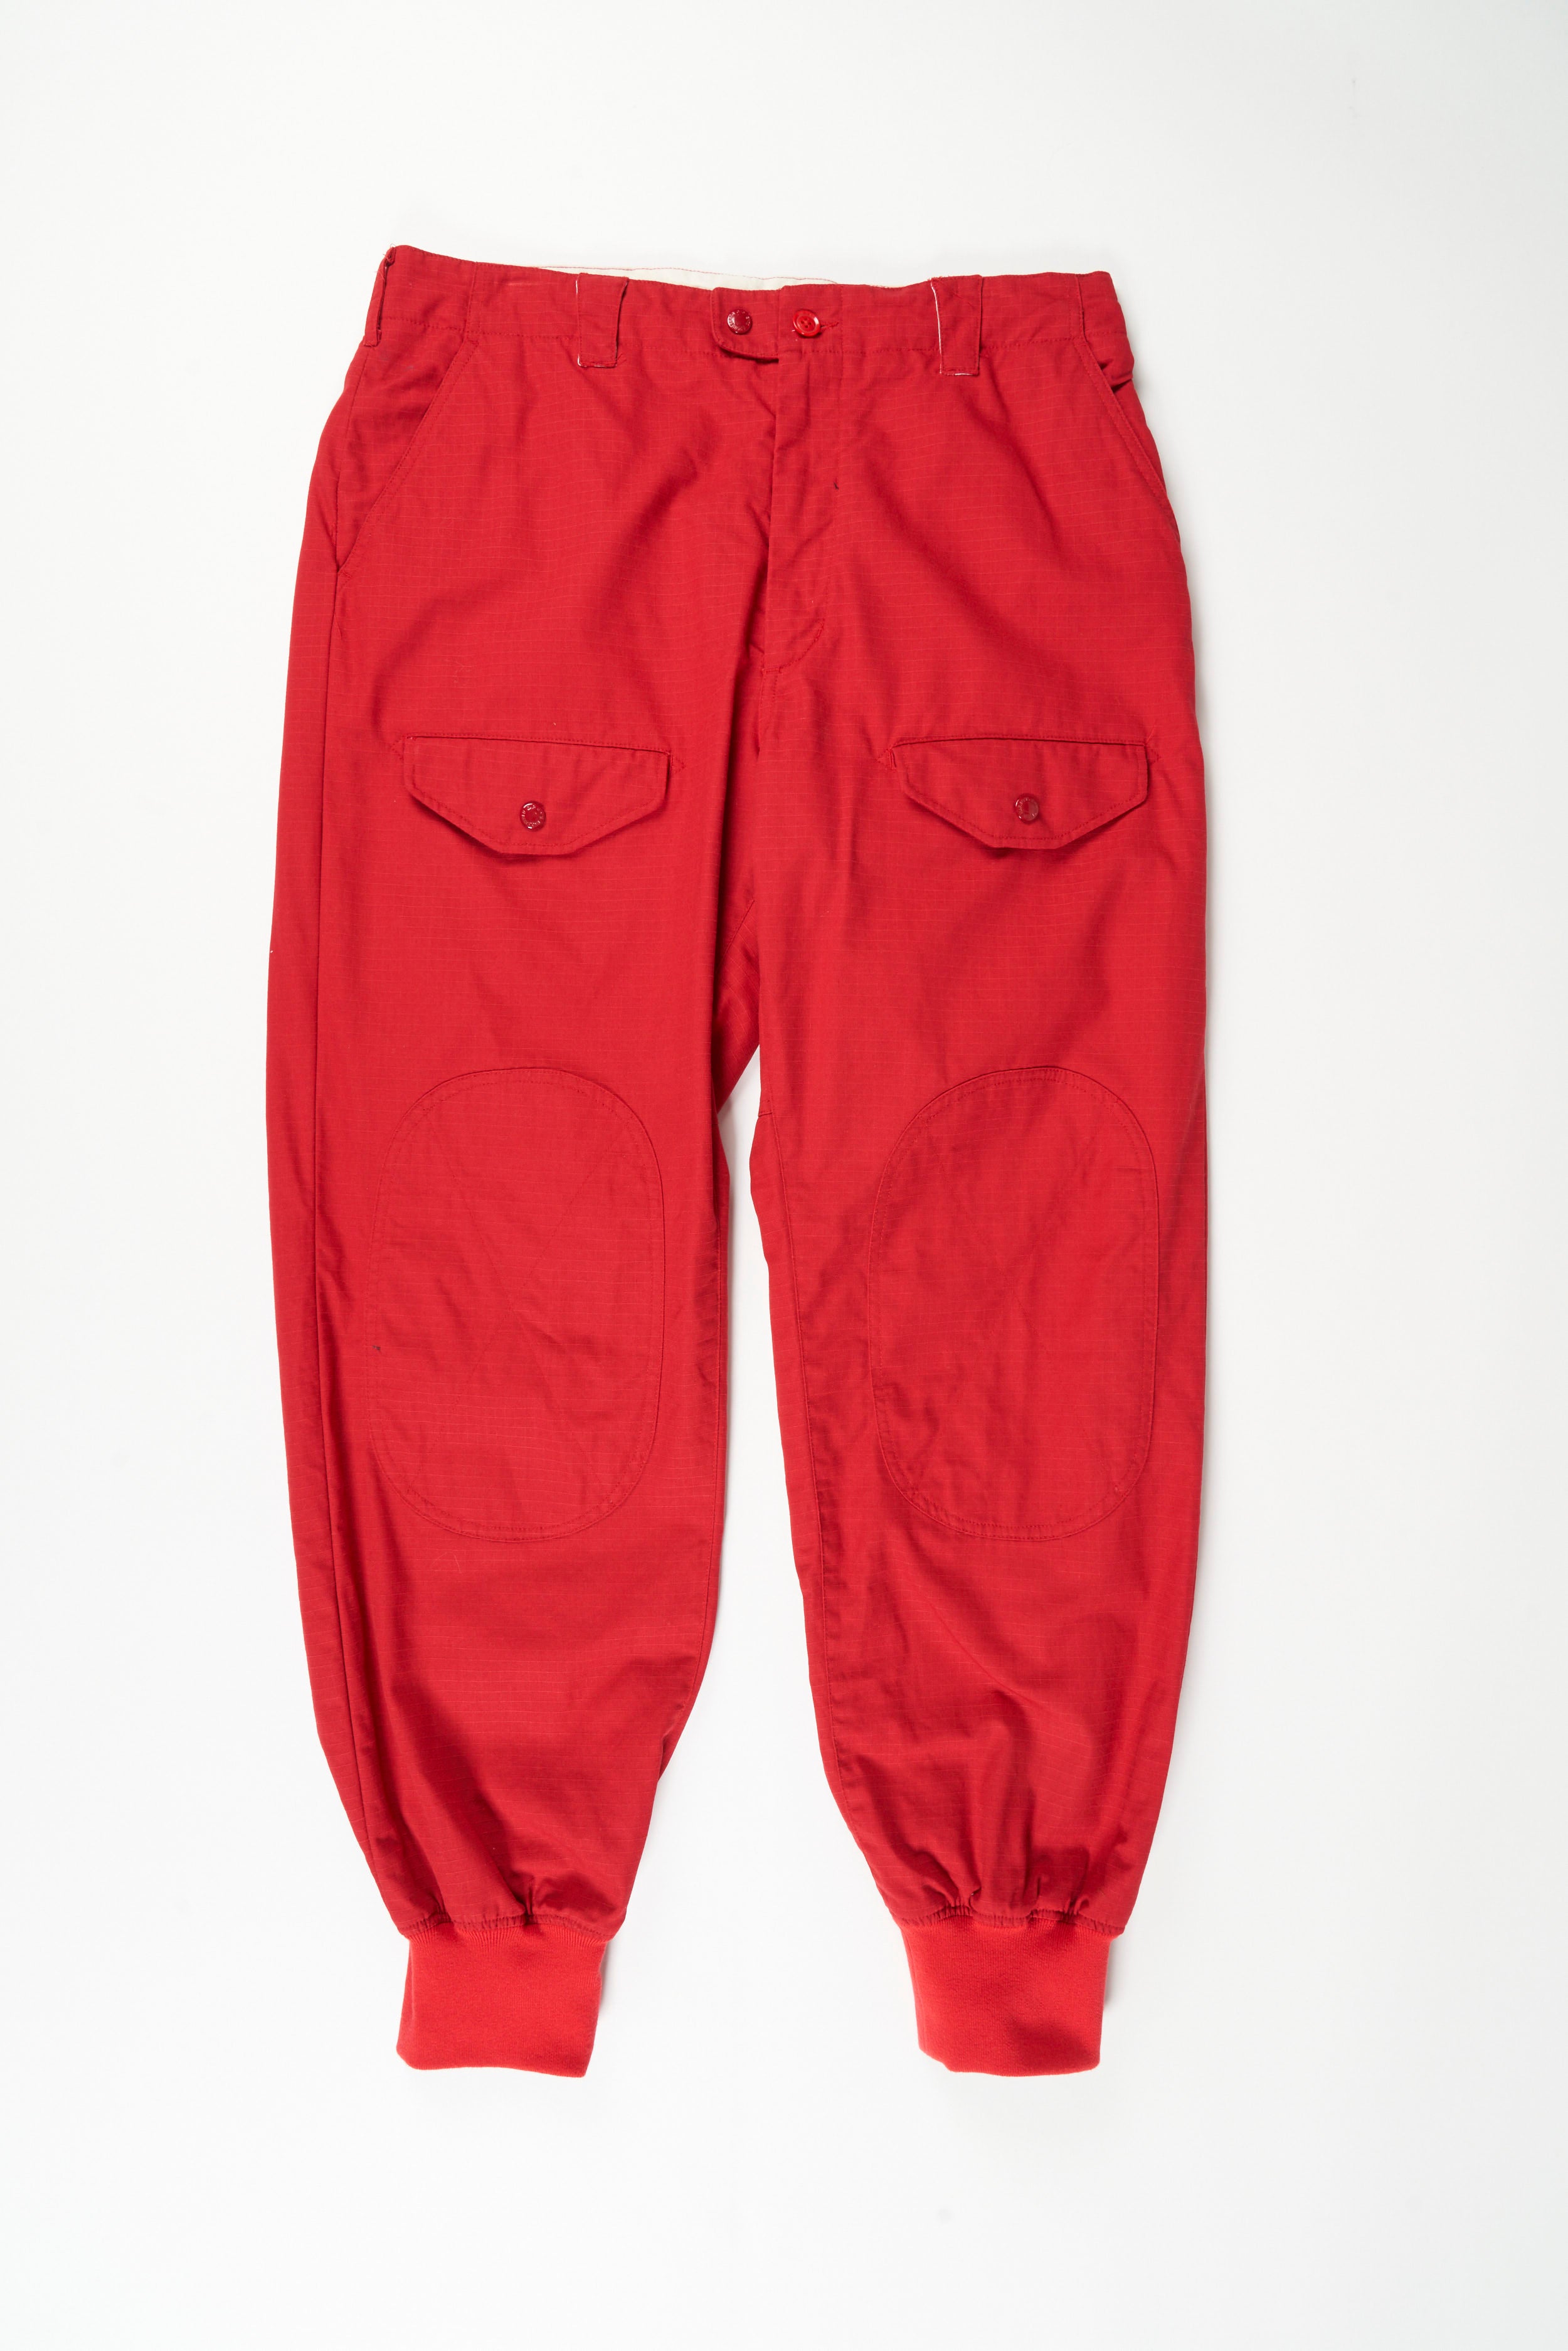 Airborne Pant - Red Cotton Ripstop